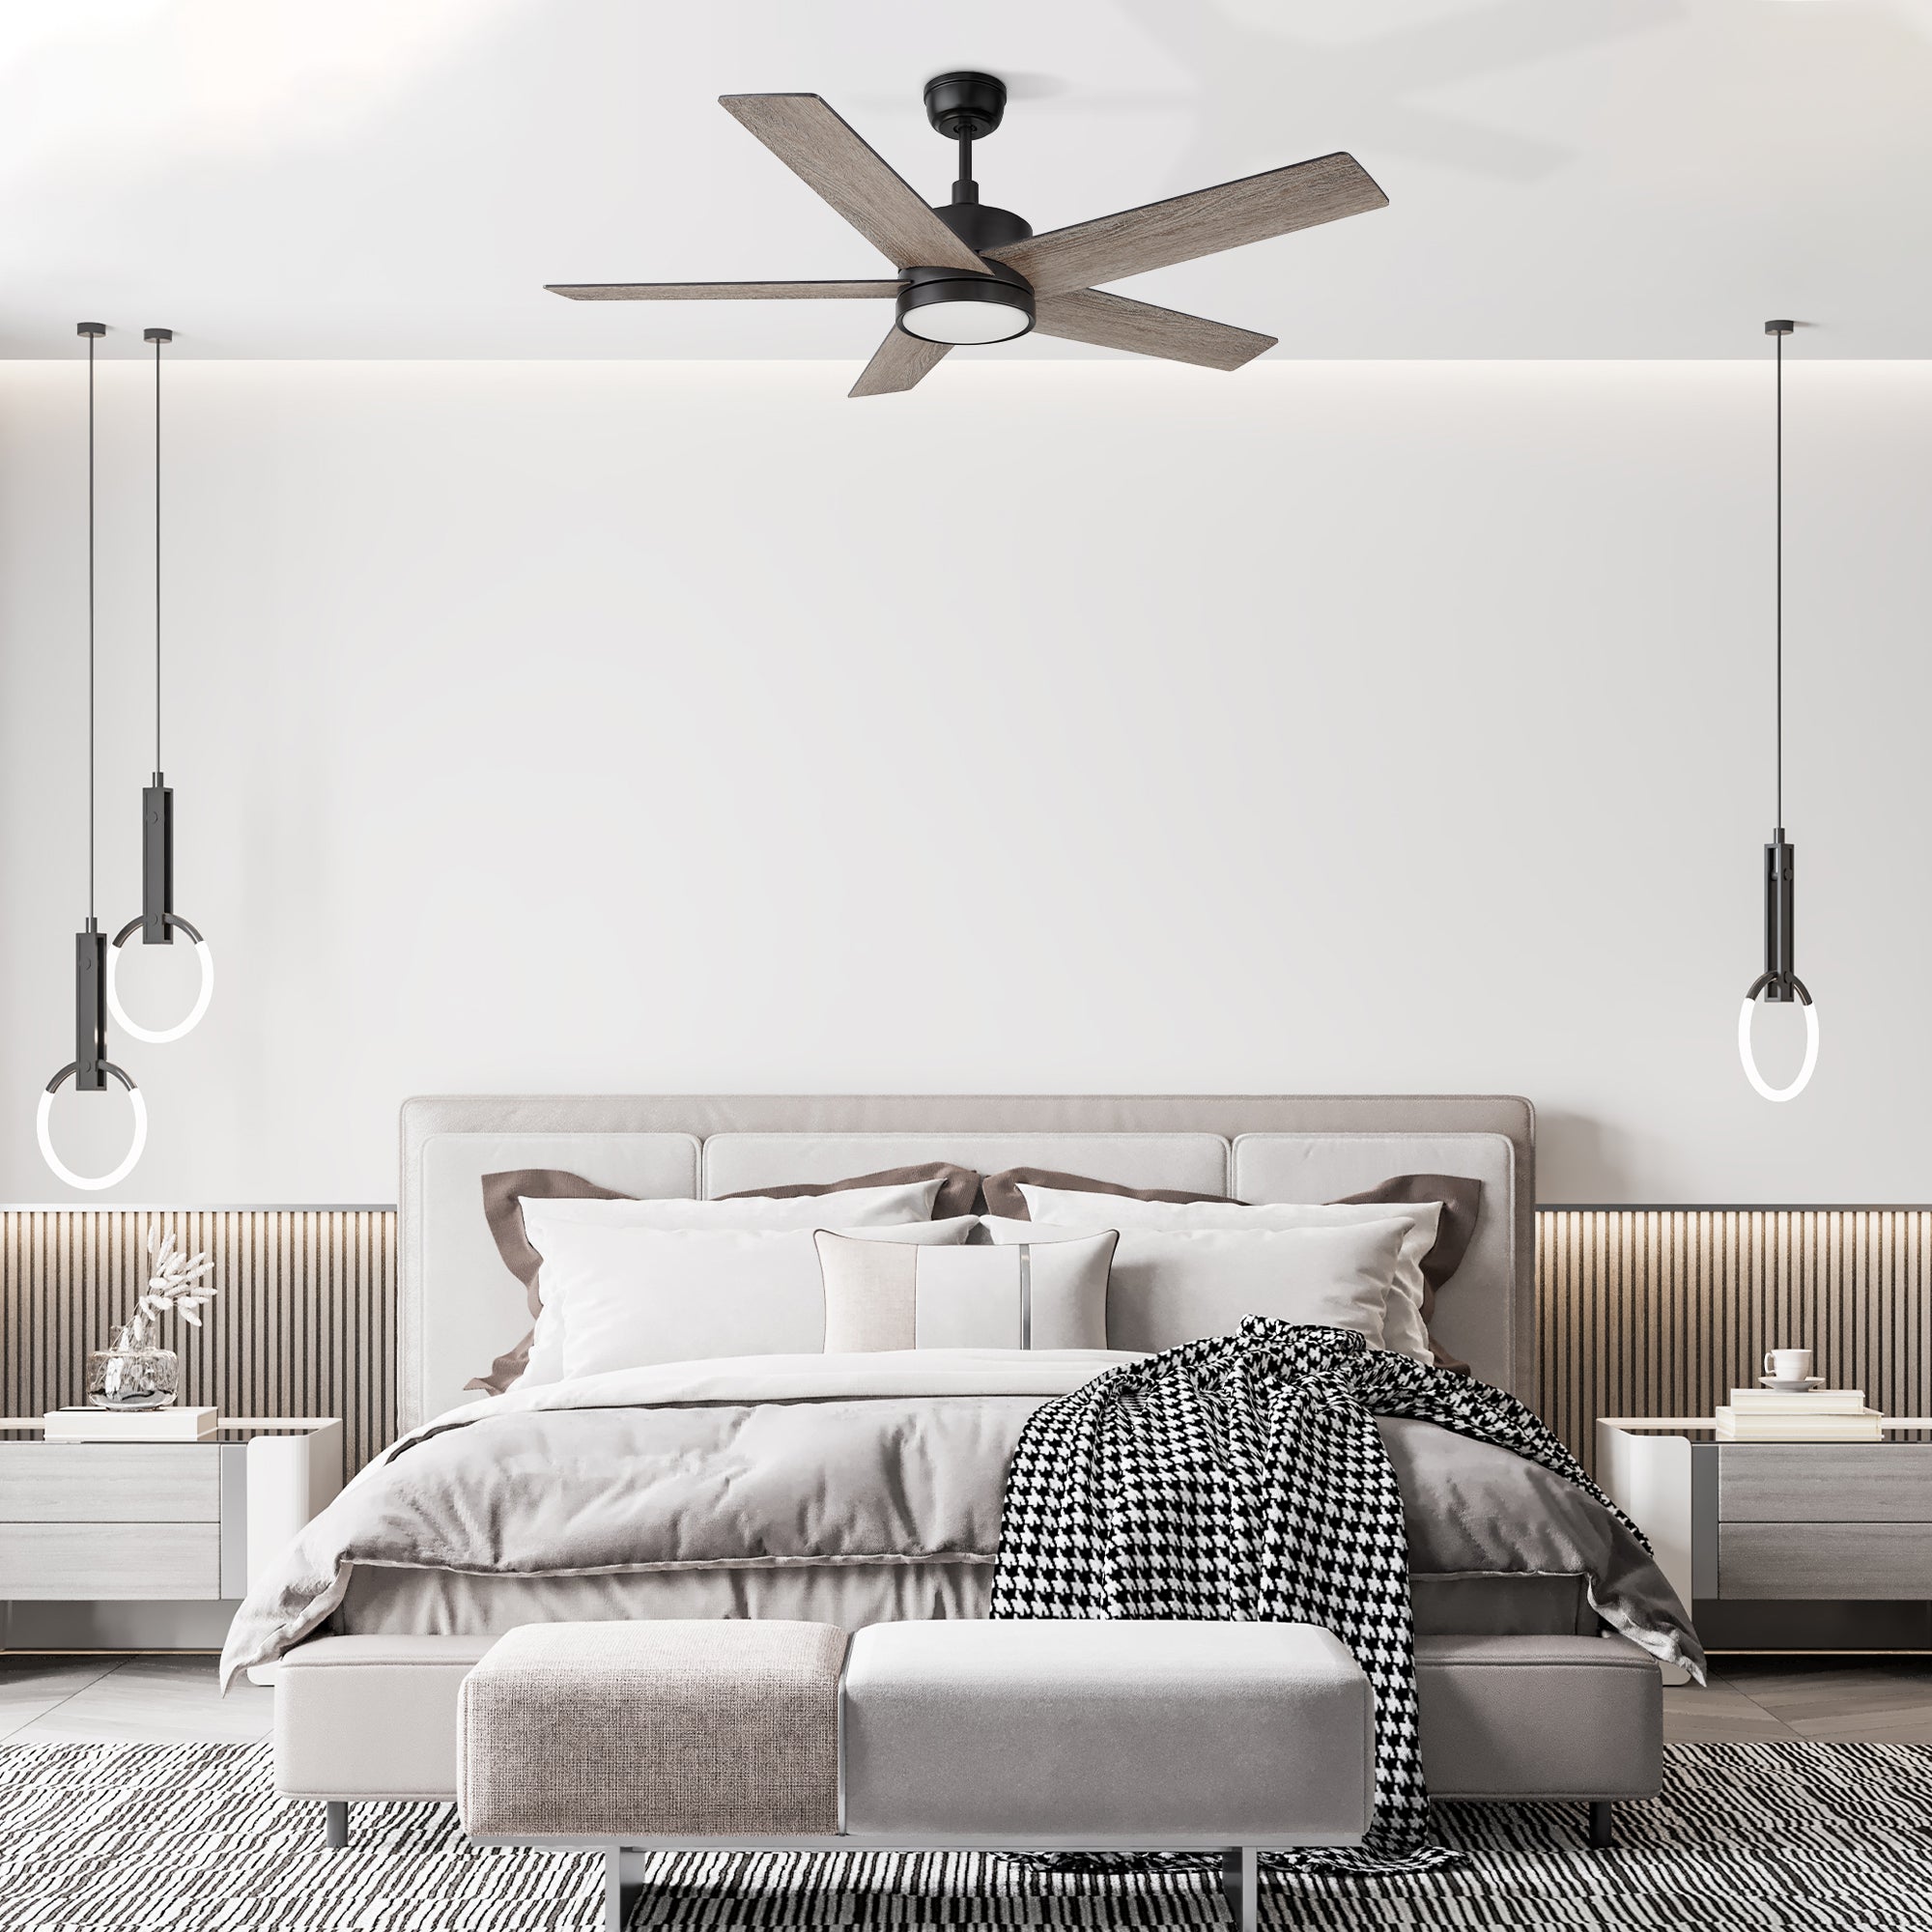 52in black Ceiling Fan: Modern design for a stylish bedroom. Remote-controlled and 10 speeds reversible motor. 